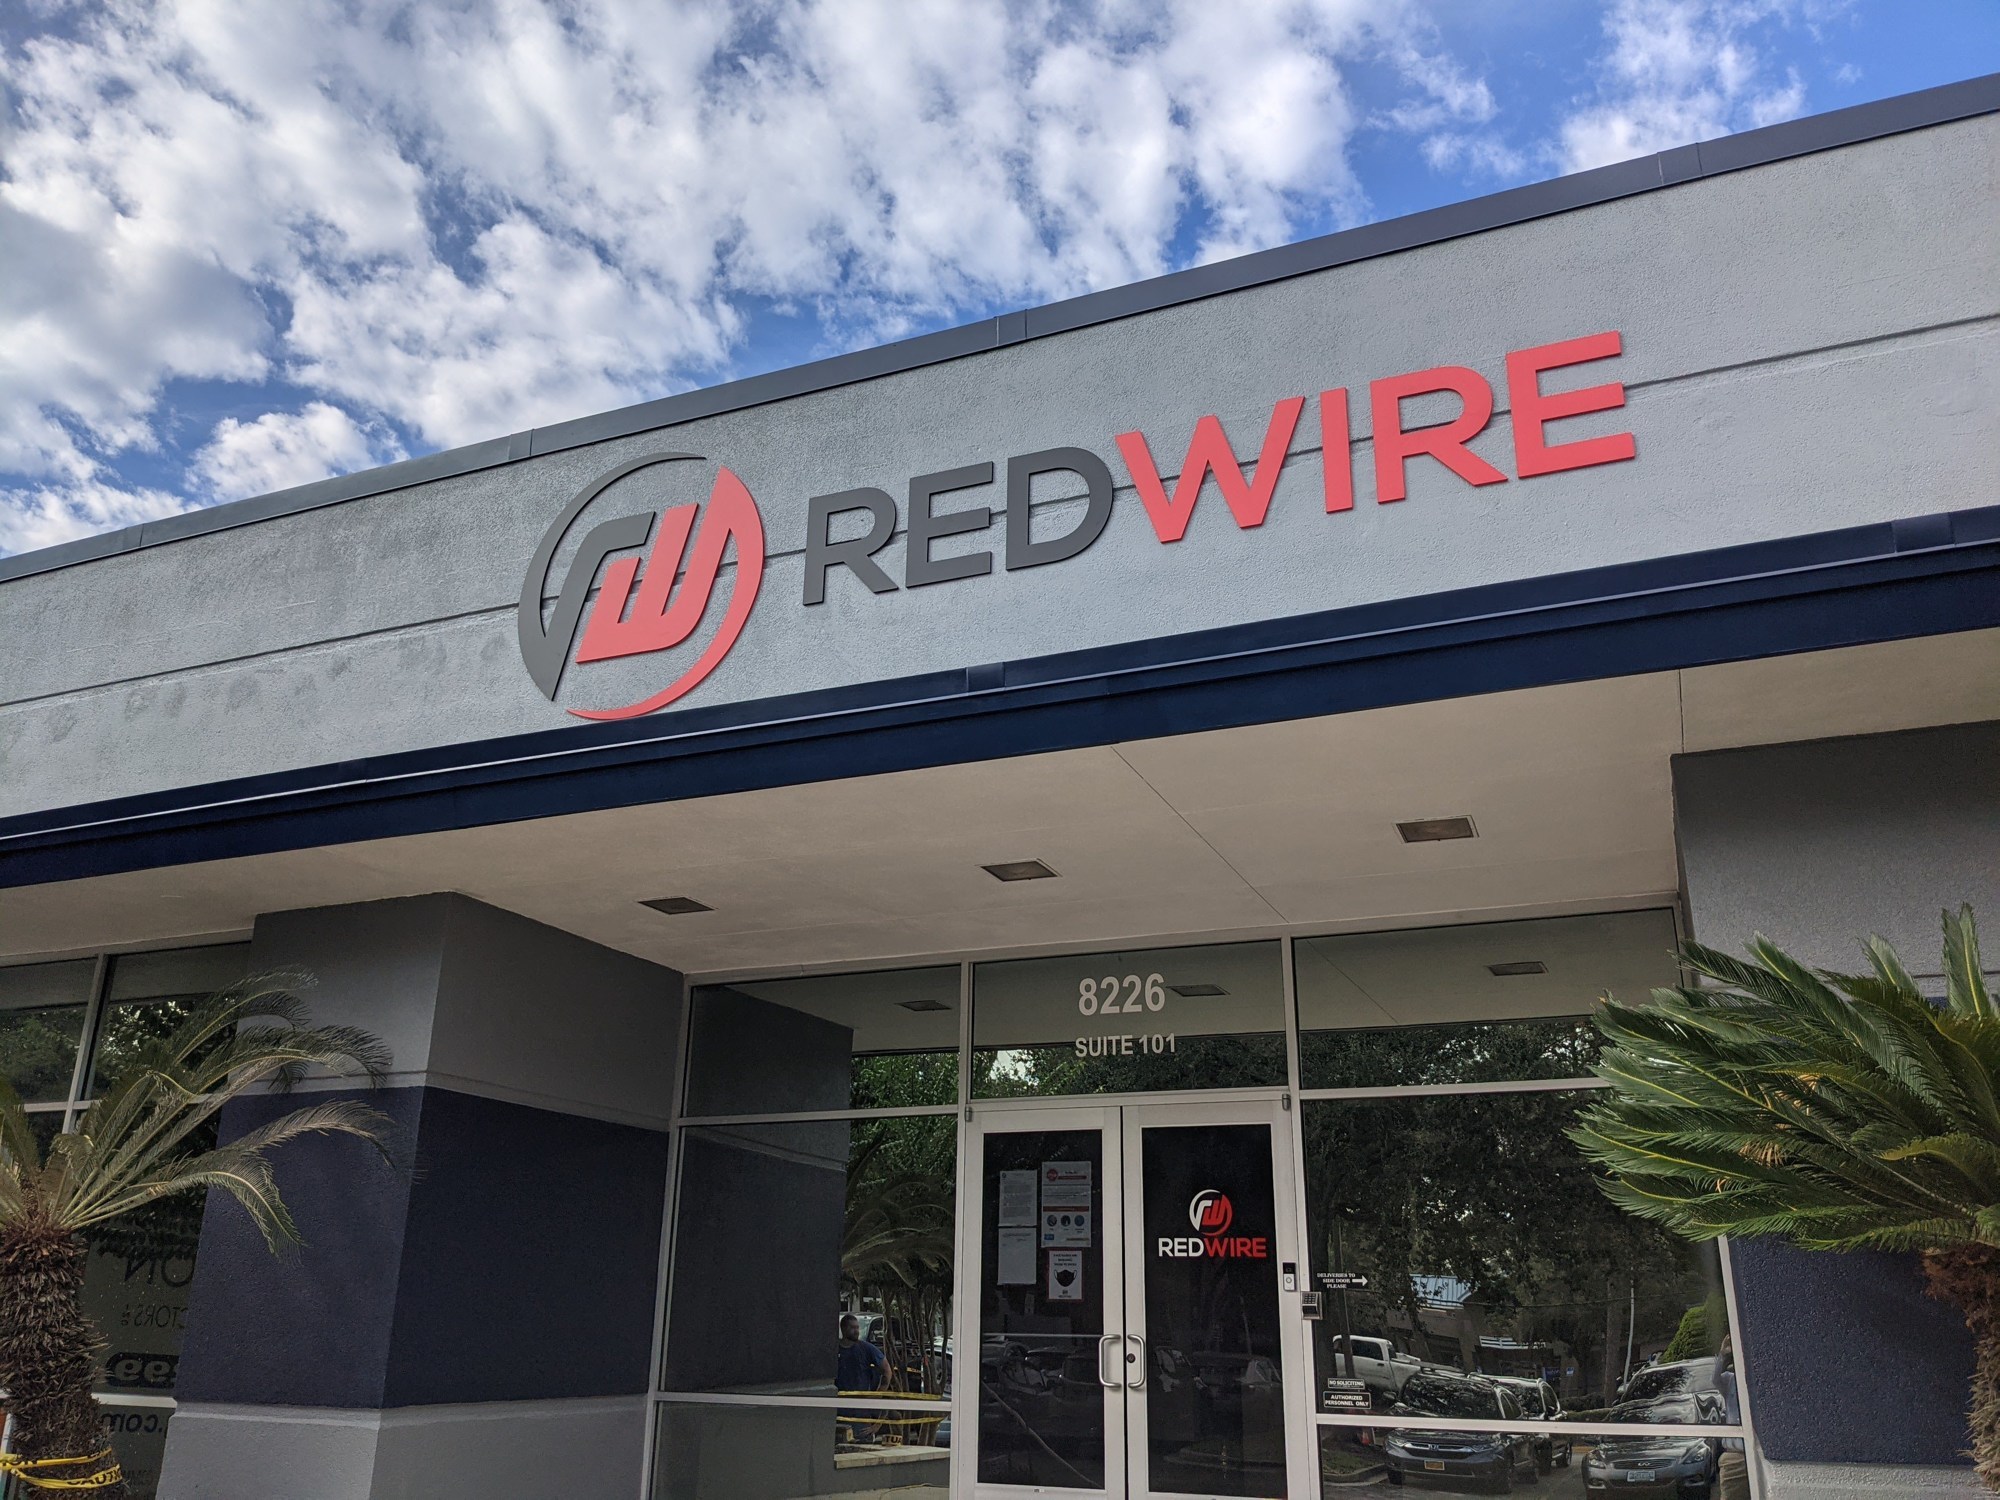 Redwire is at 8226 Philips Highway in the Baymeadows area.